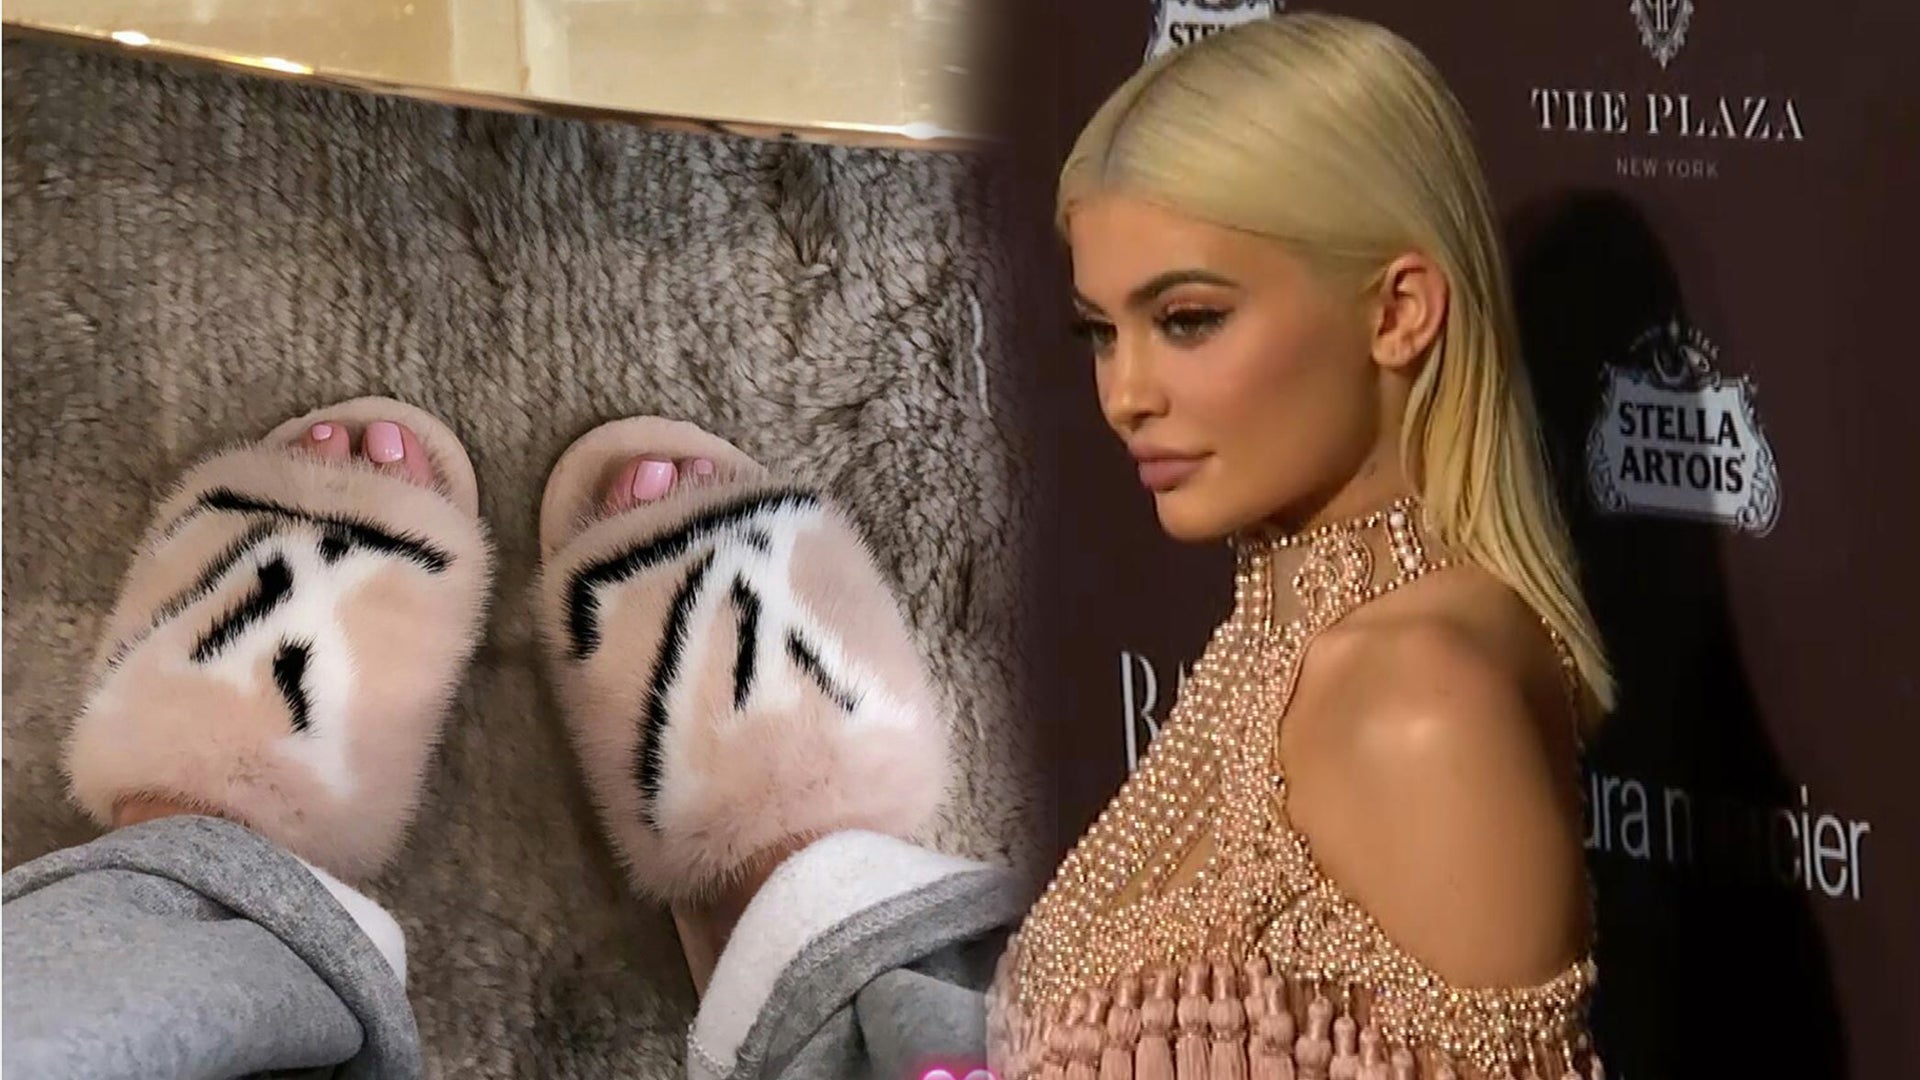 Kylie Jenner Posted About The Animals Dying In AustraliaAnd Then Posted  A Pic Of Her New Fur Slippers